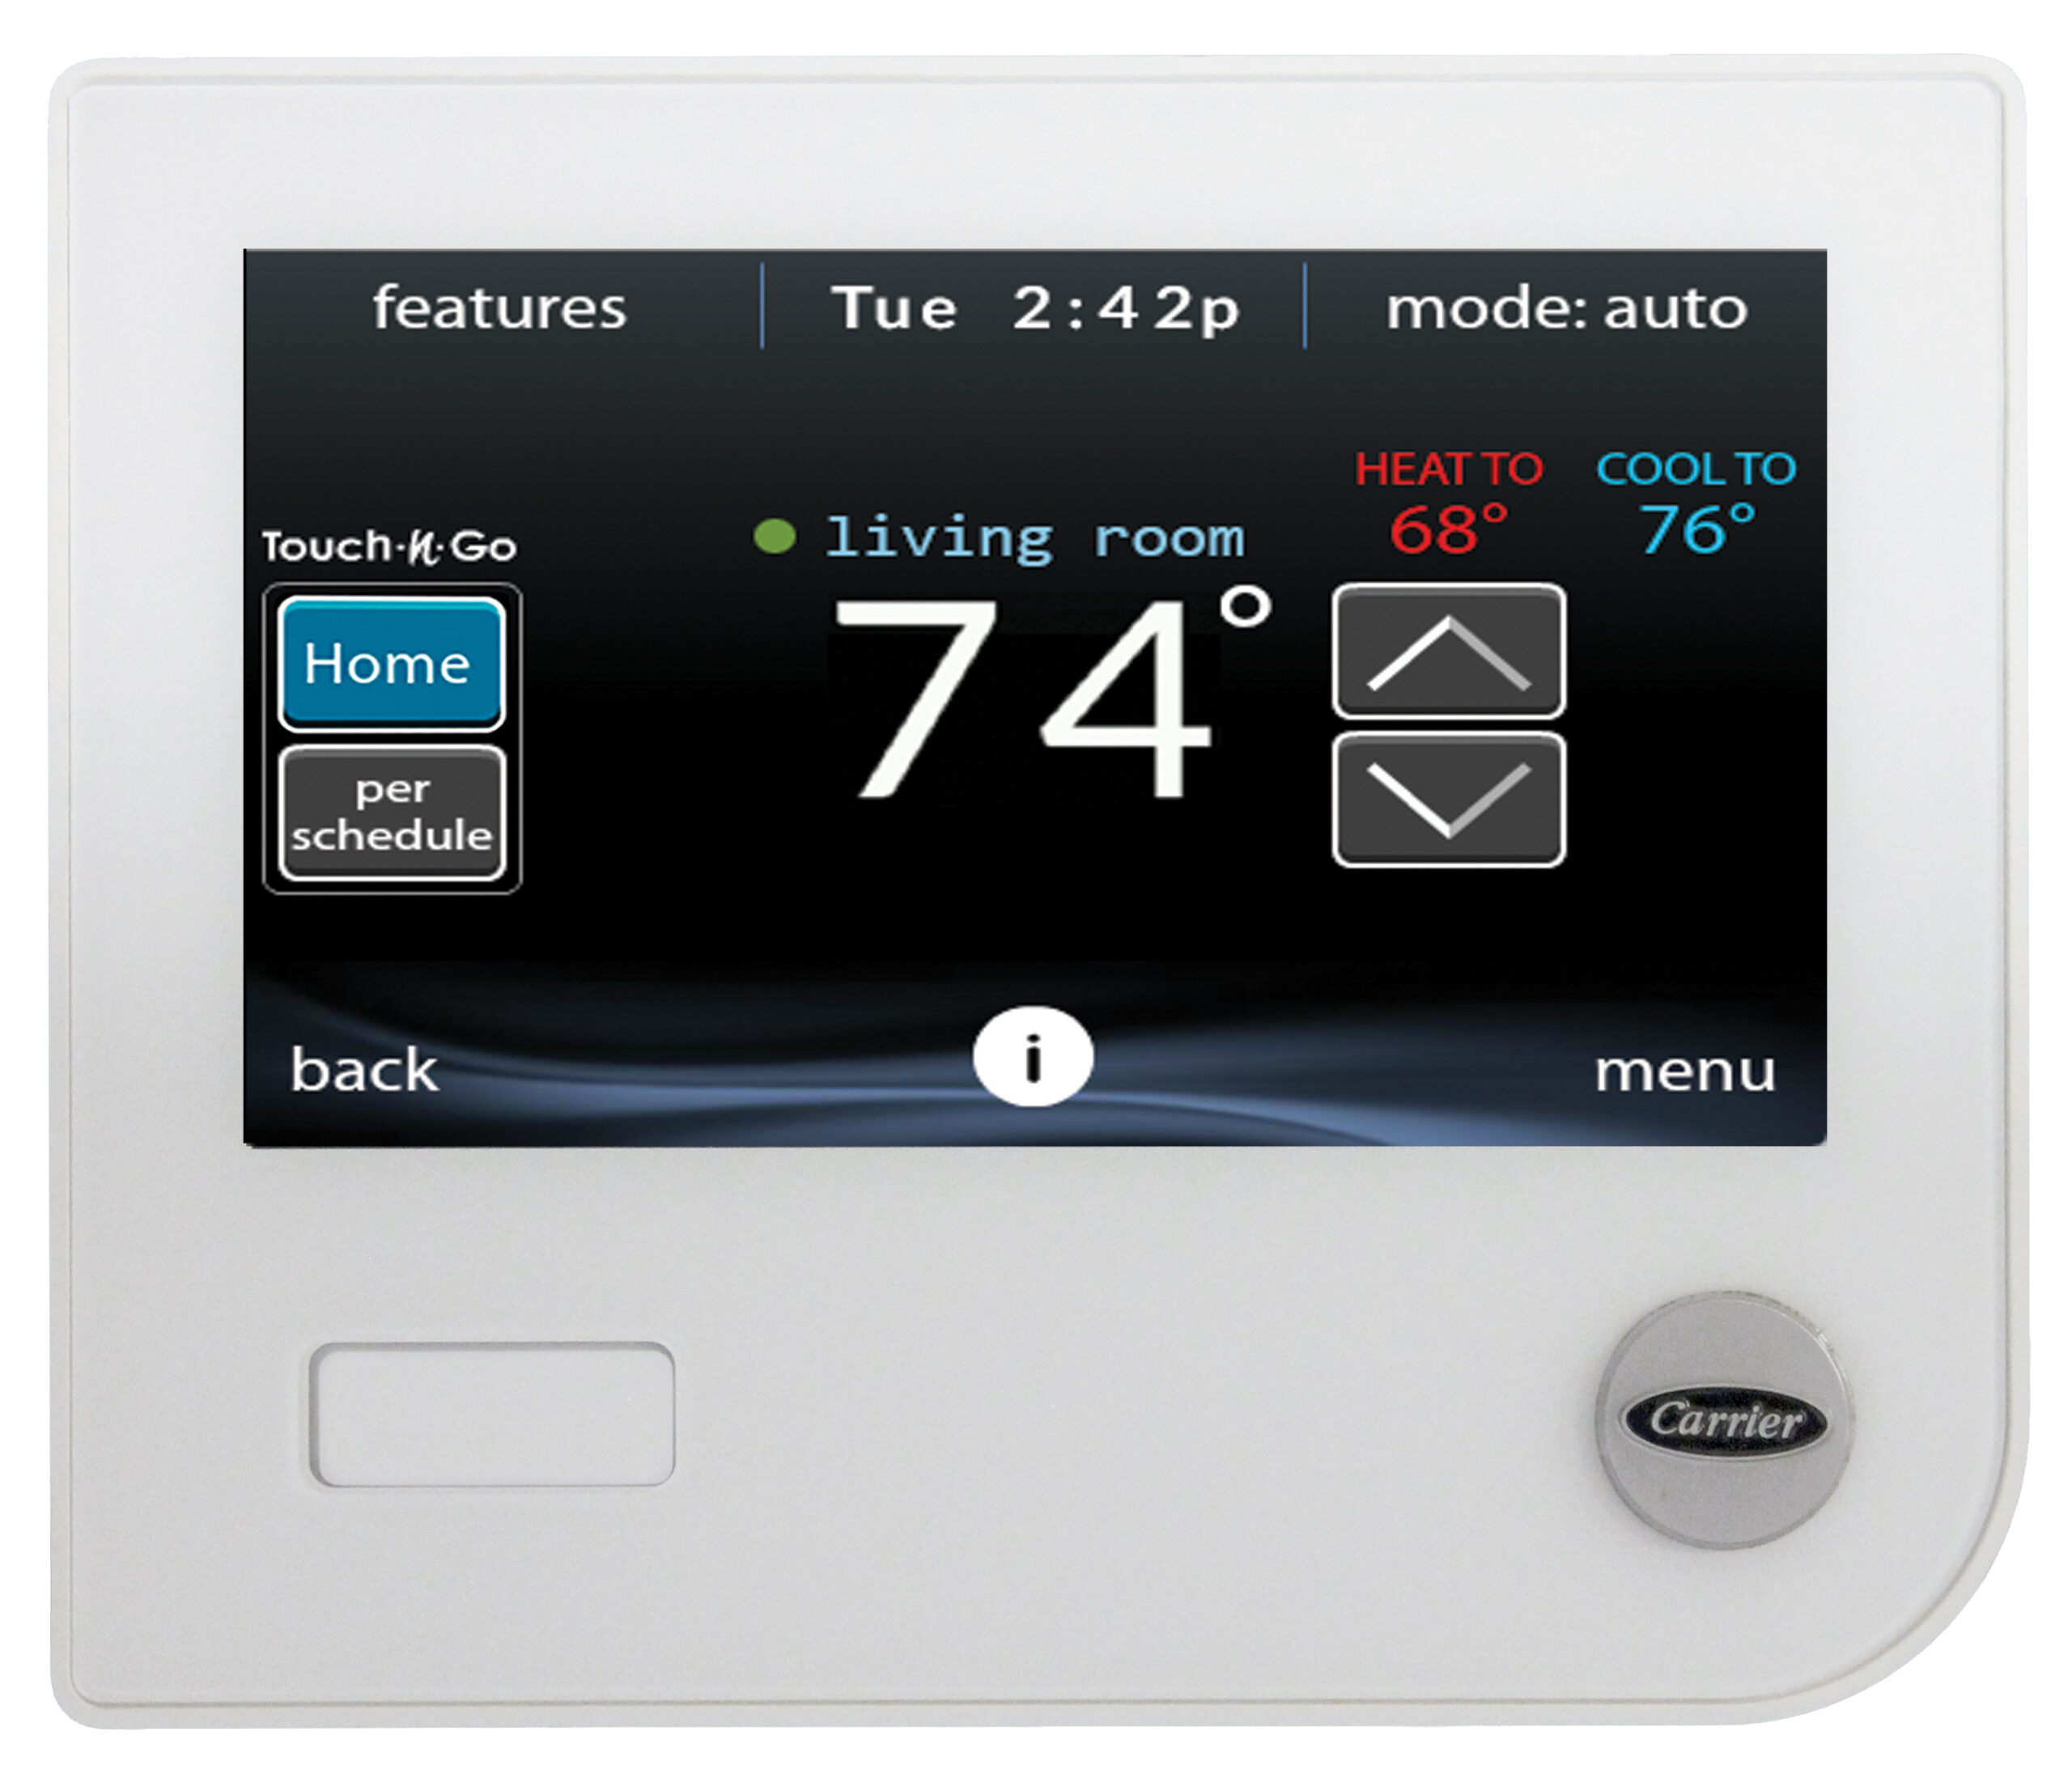 Take the time to make sure your thermostat is functioning properly.